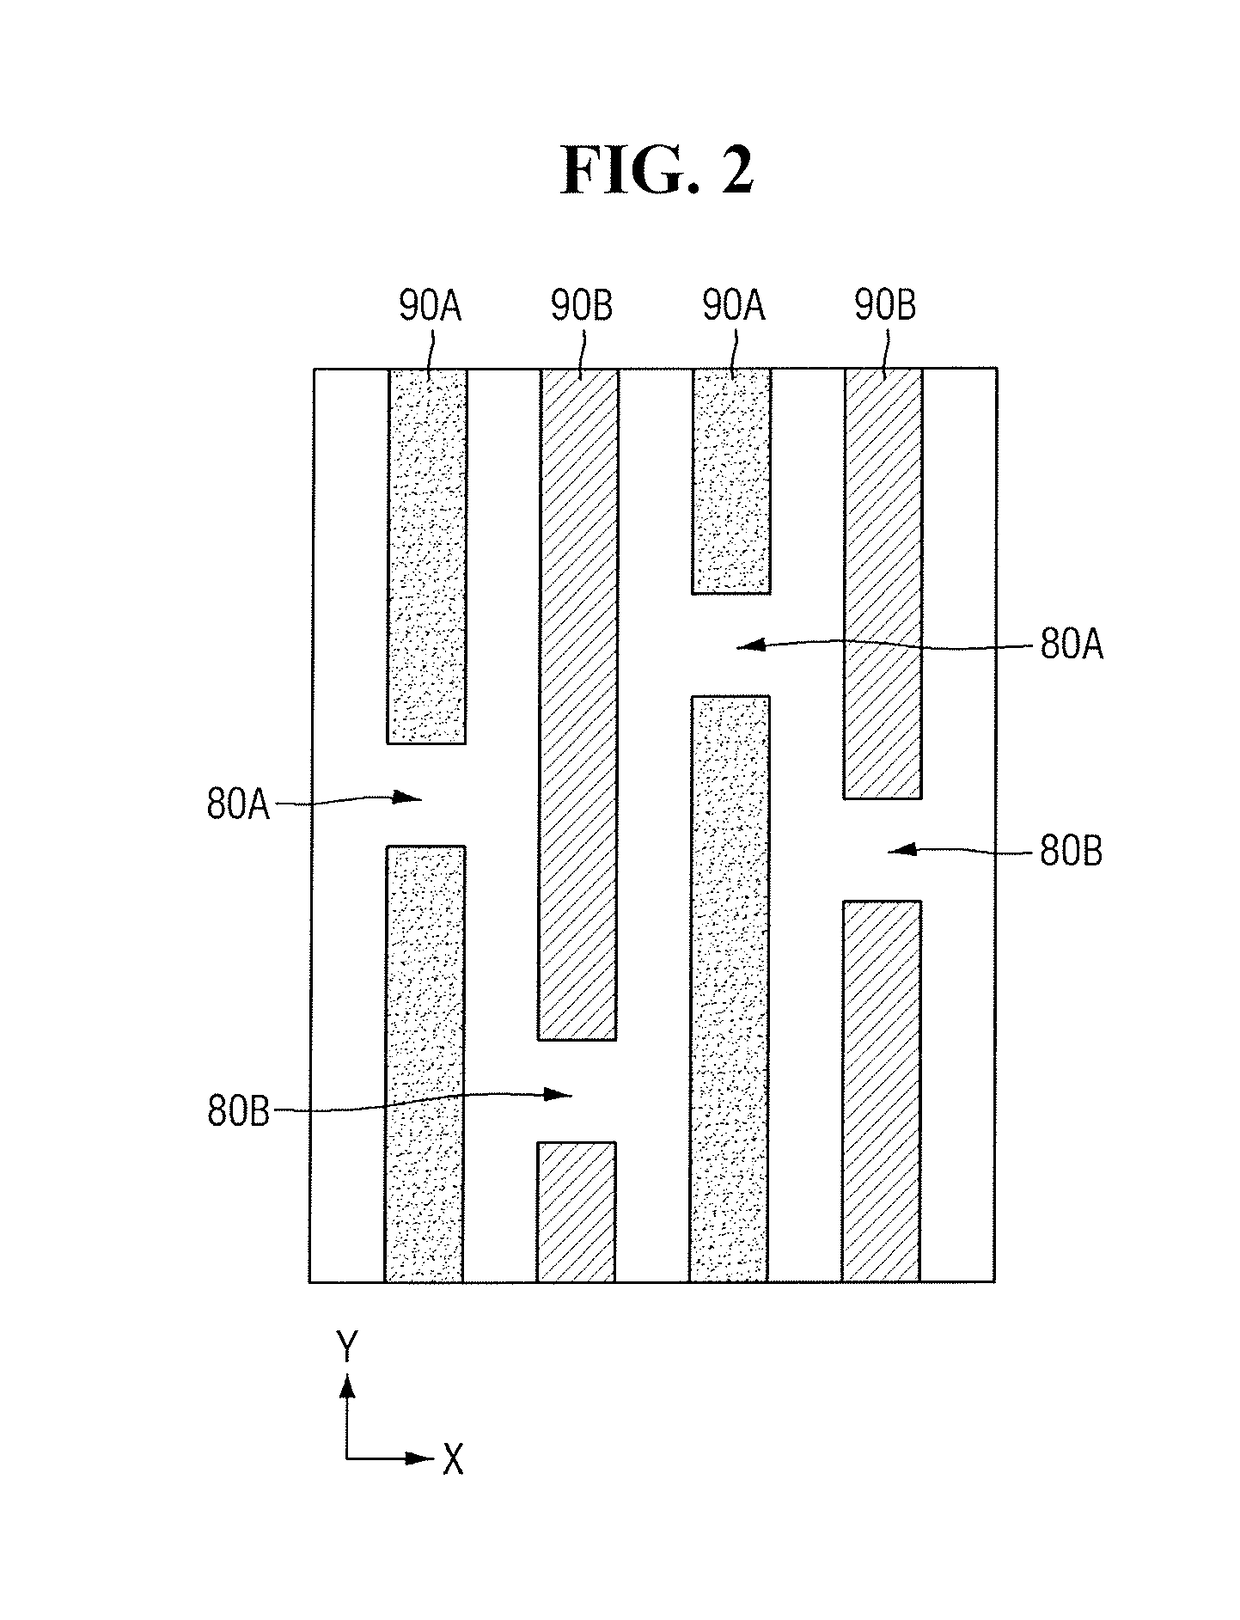 Self-aligned block patterning with density assist pattern